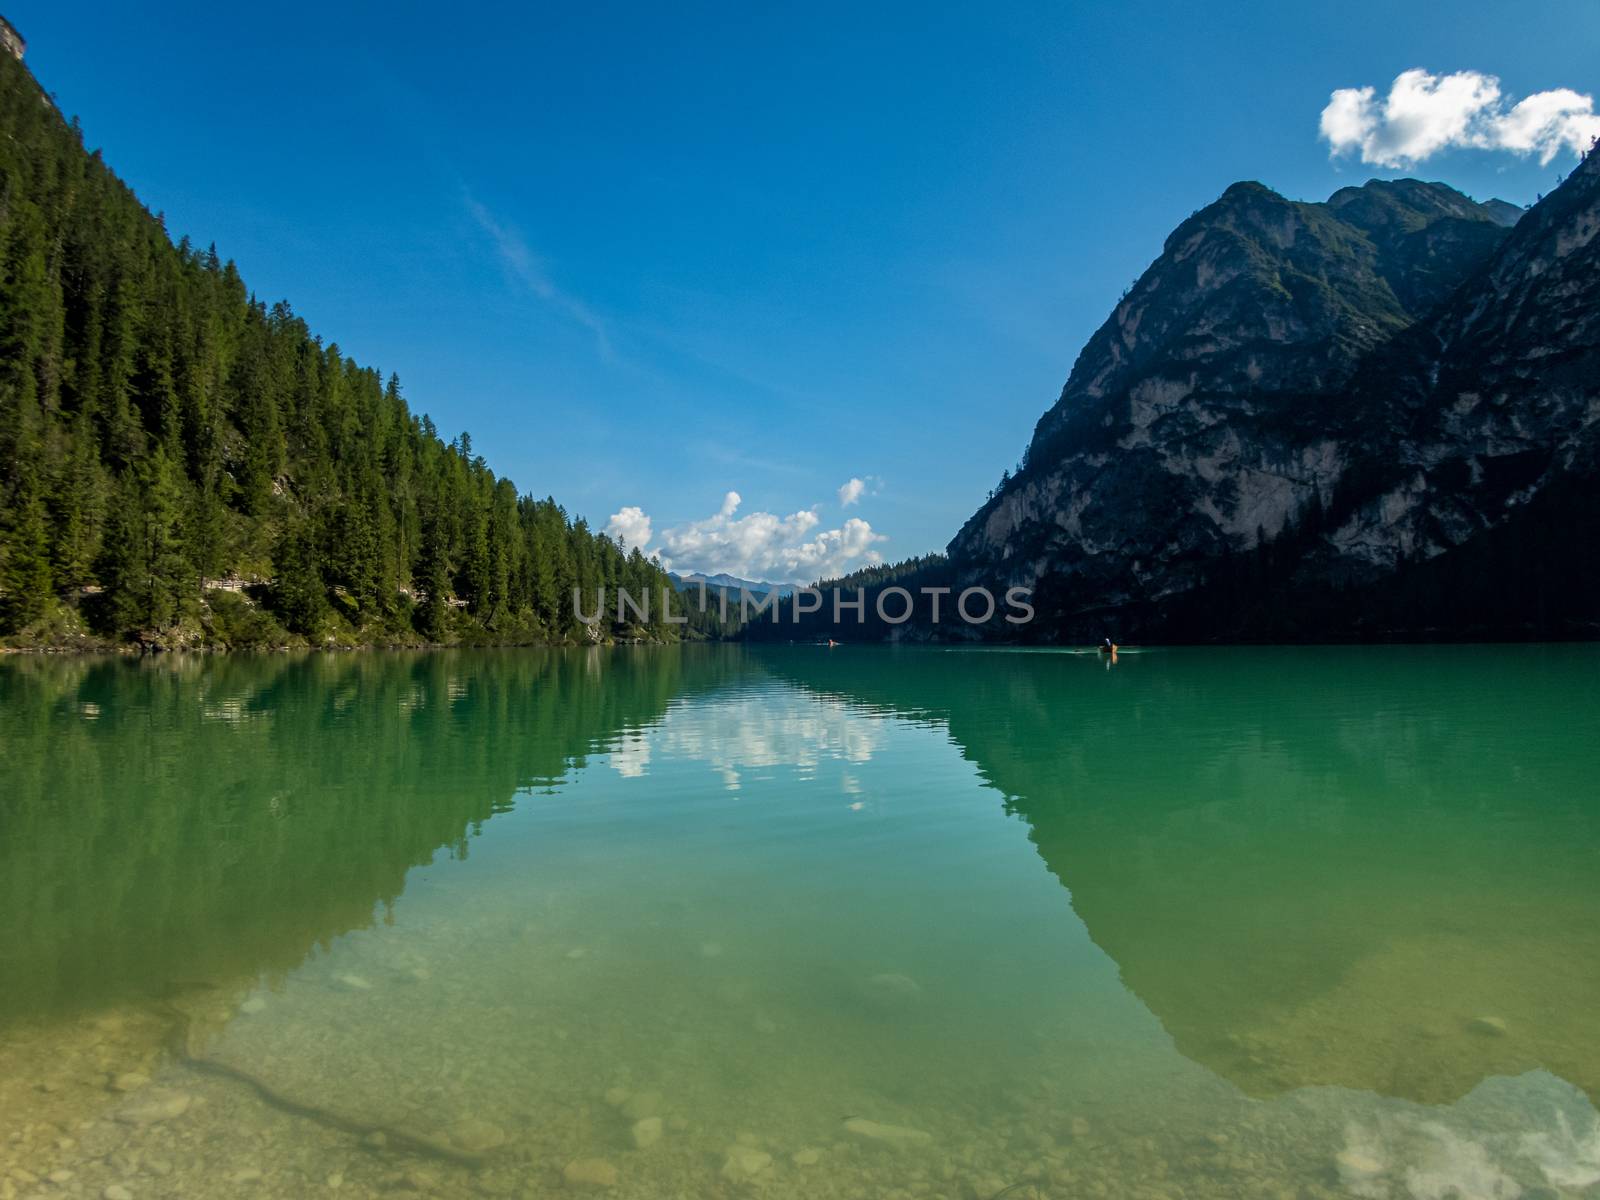 Pragser Wildsee in the Dolomites, South Tyrol by mindscapephotos